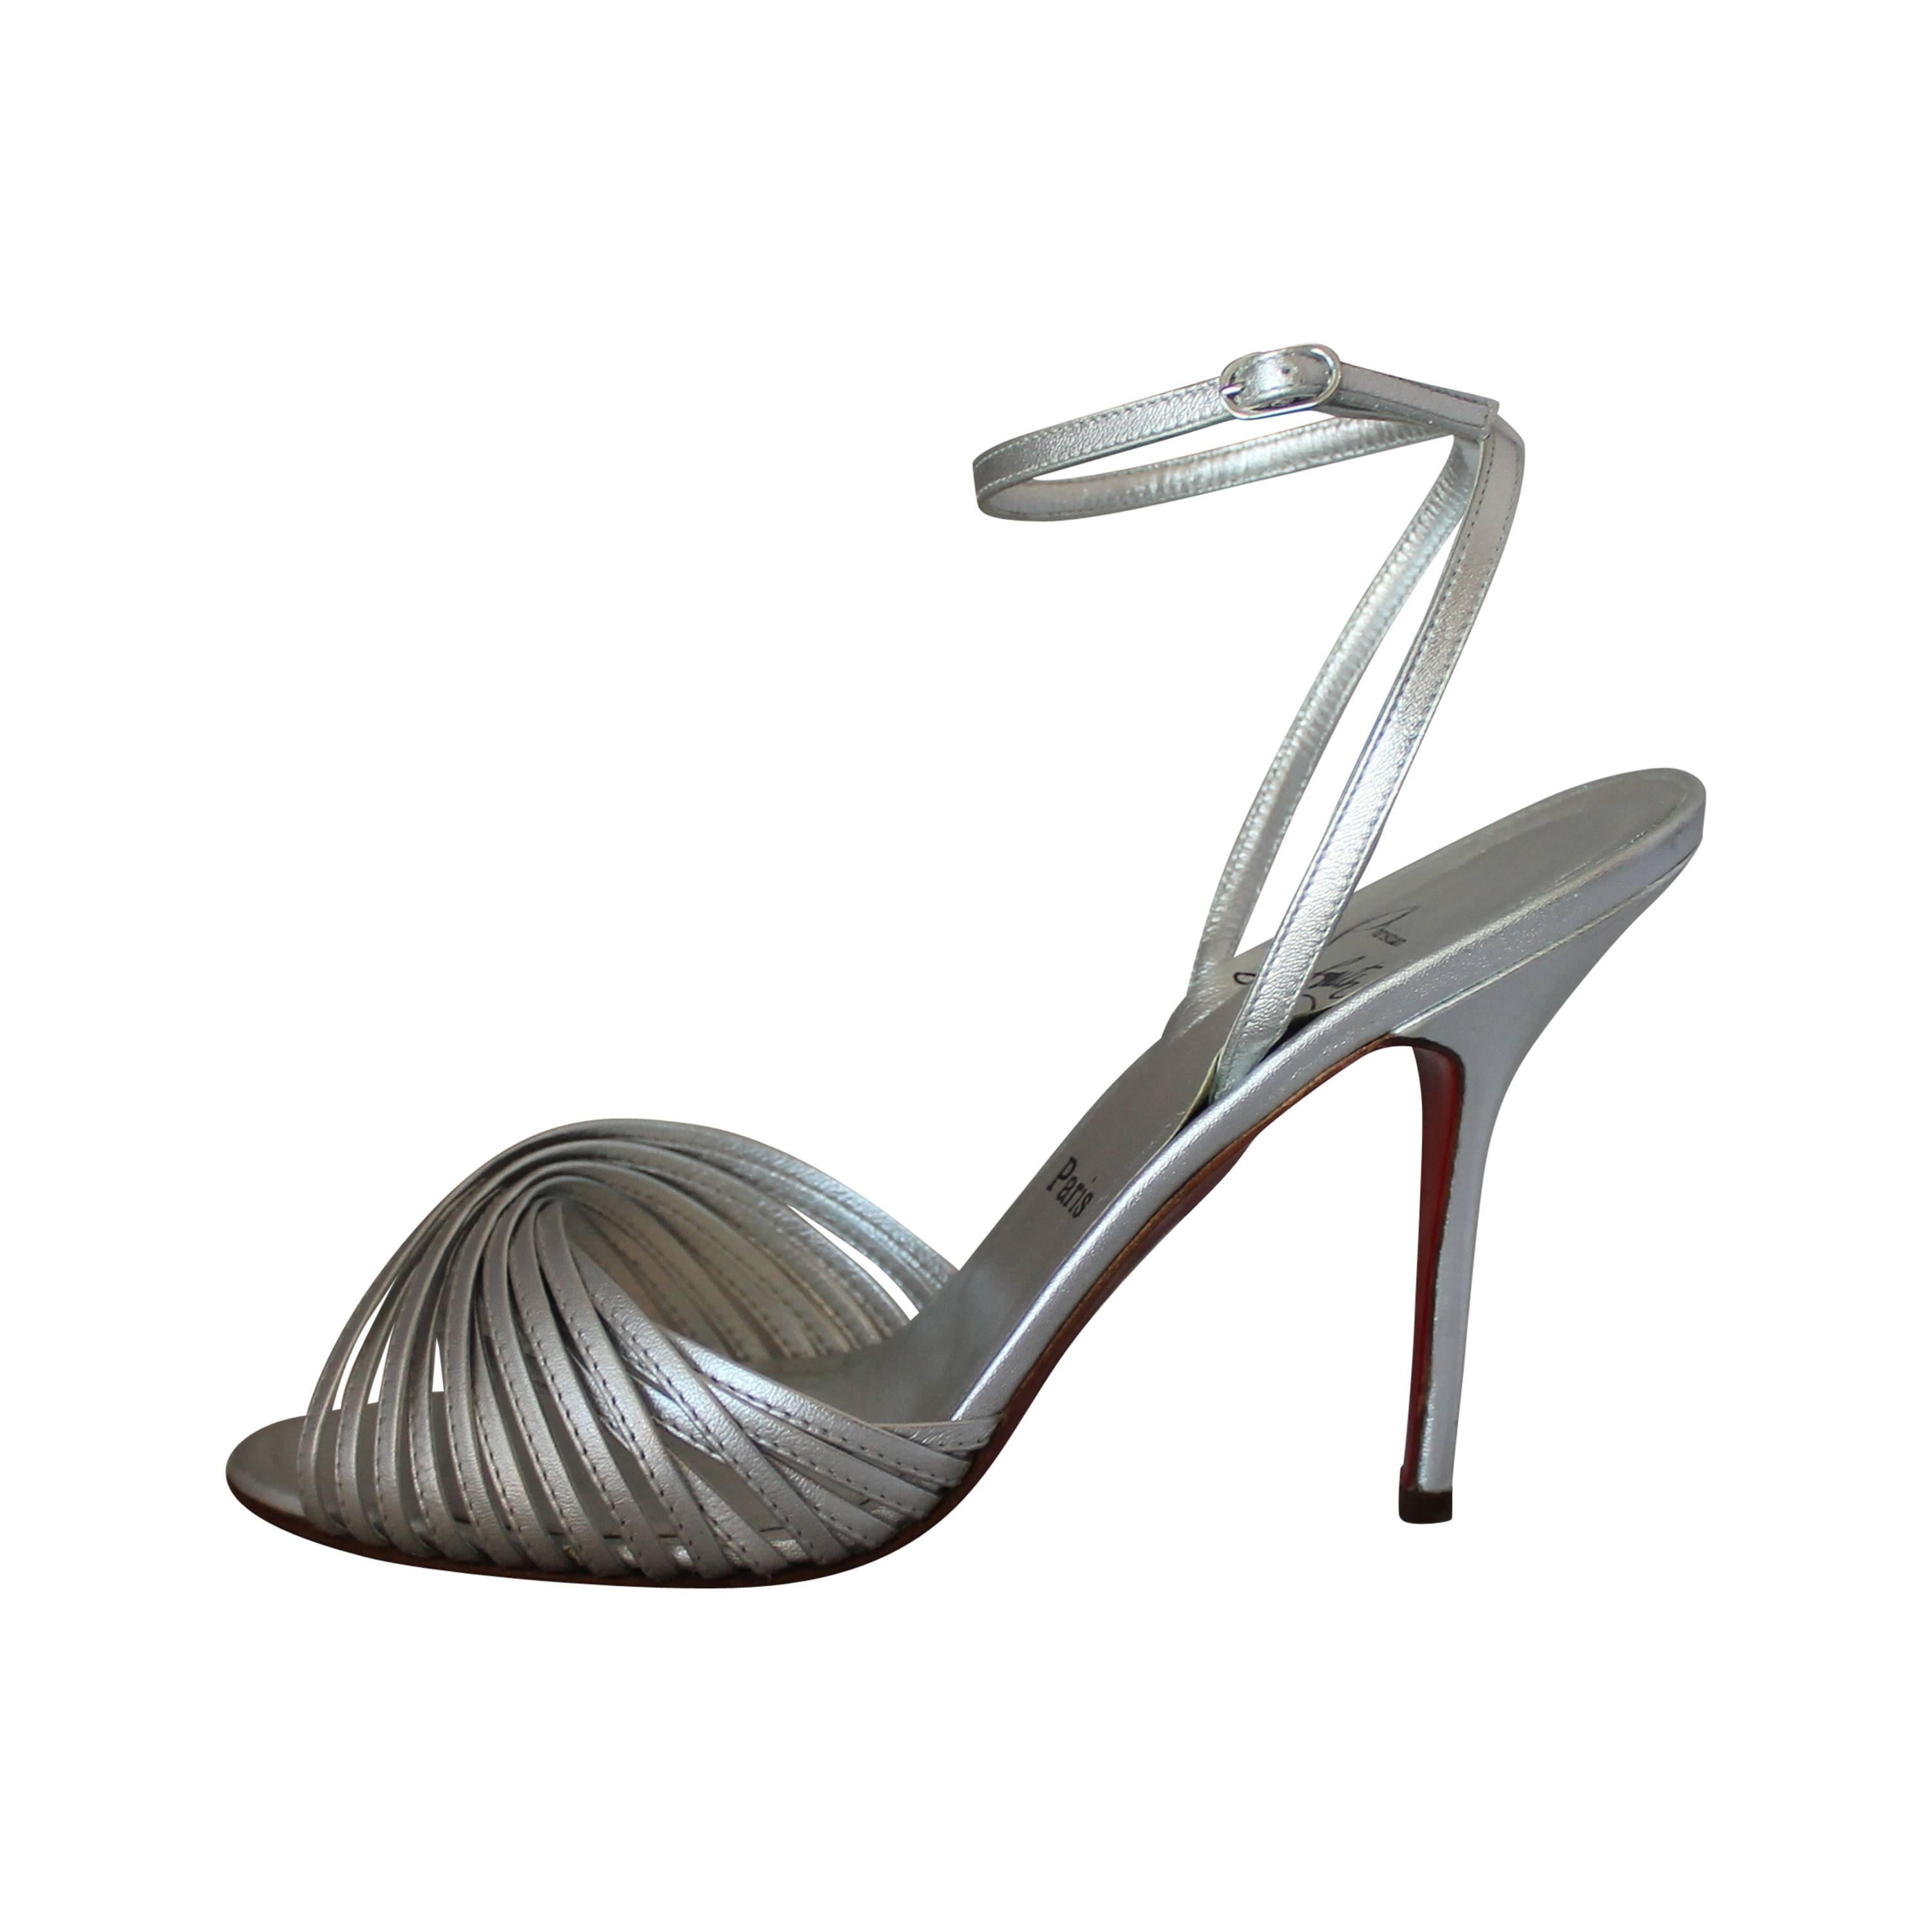 Christian Louboutin Silver Strappy Leather Sandal with Ankle Strap - 39.5